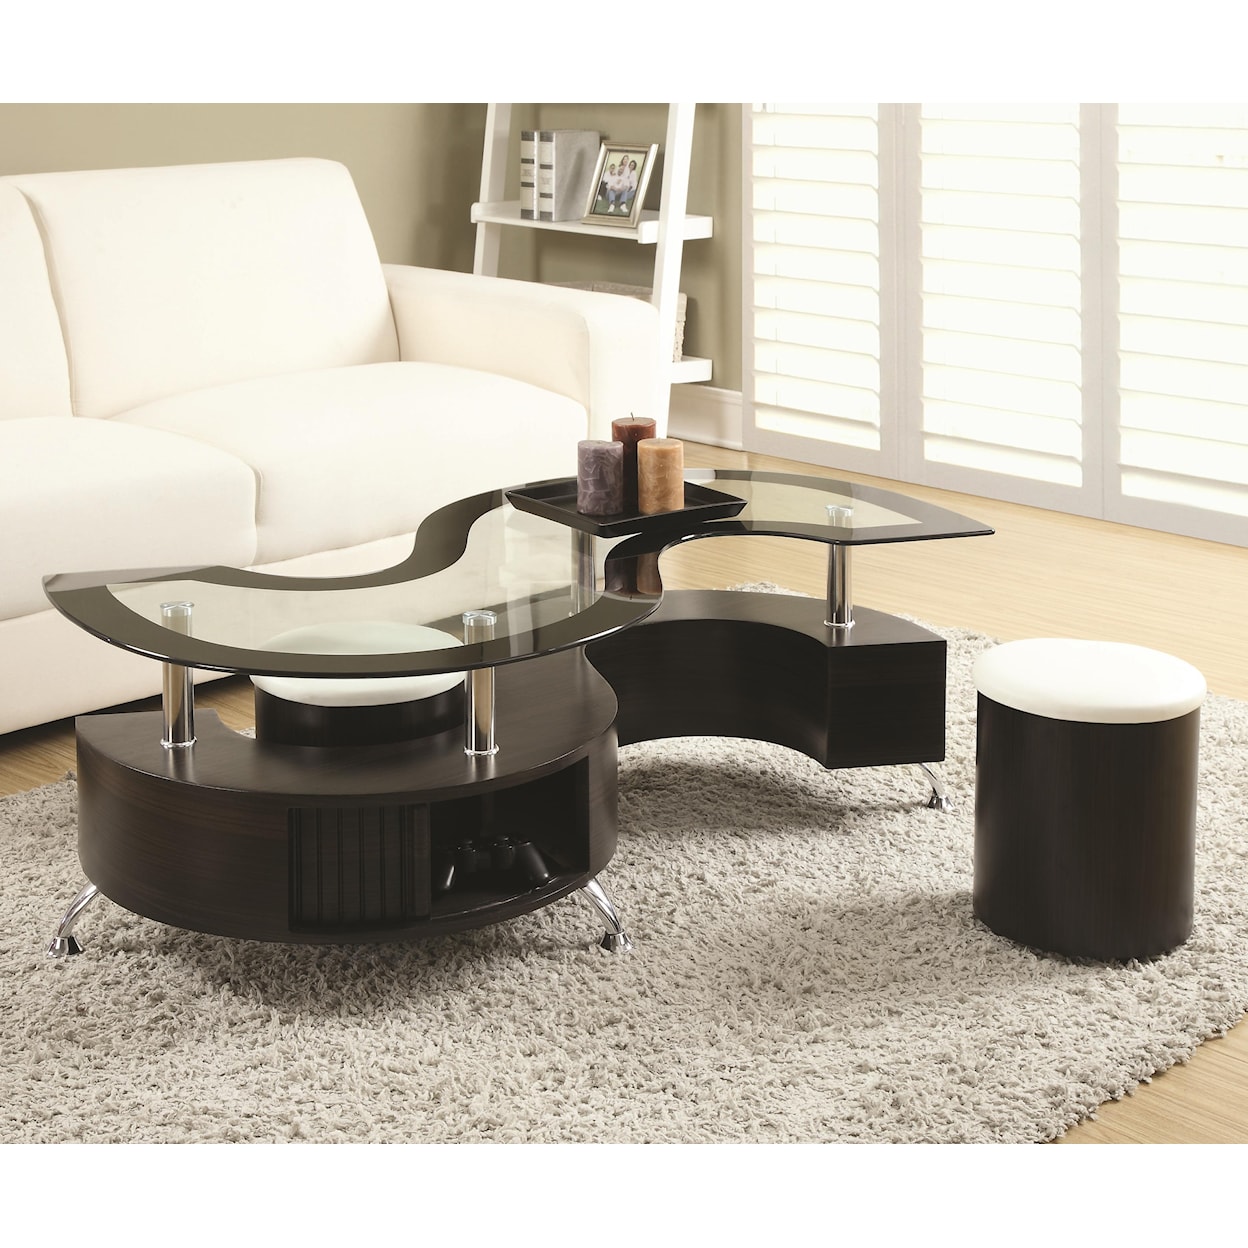 Coaster White S Shaped Coffee Table w/ 2 Stools Coffee Table and Stools